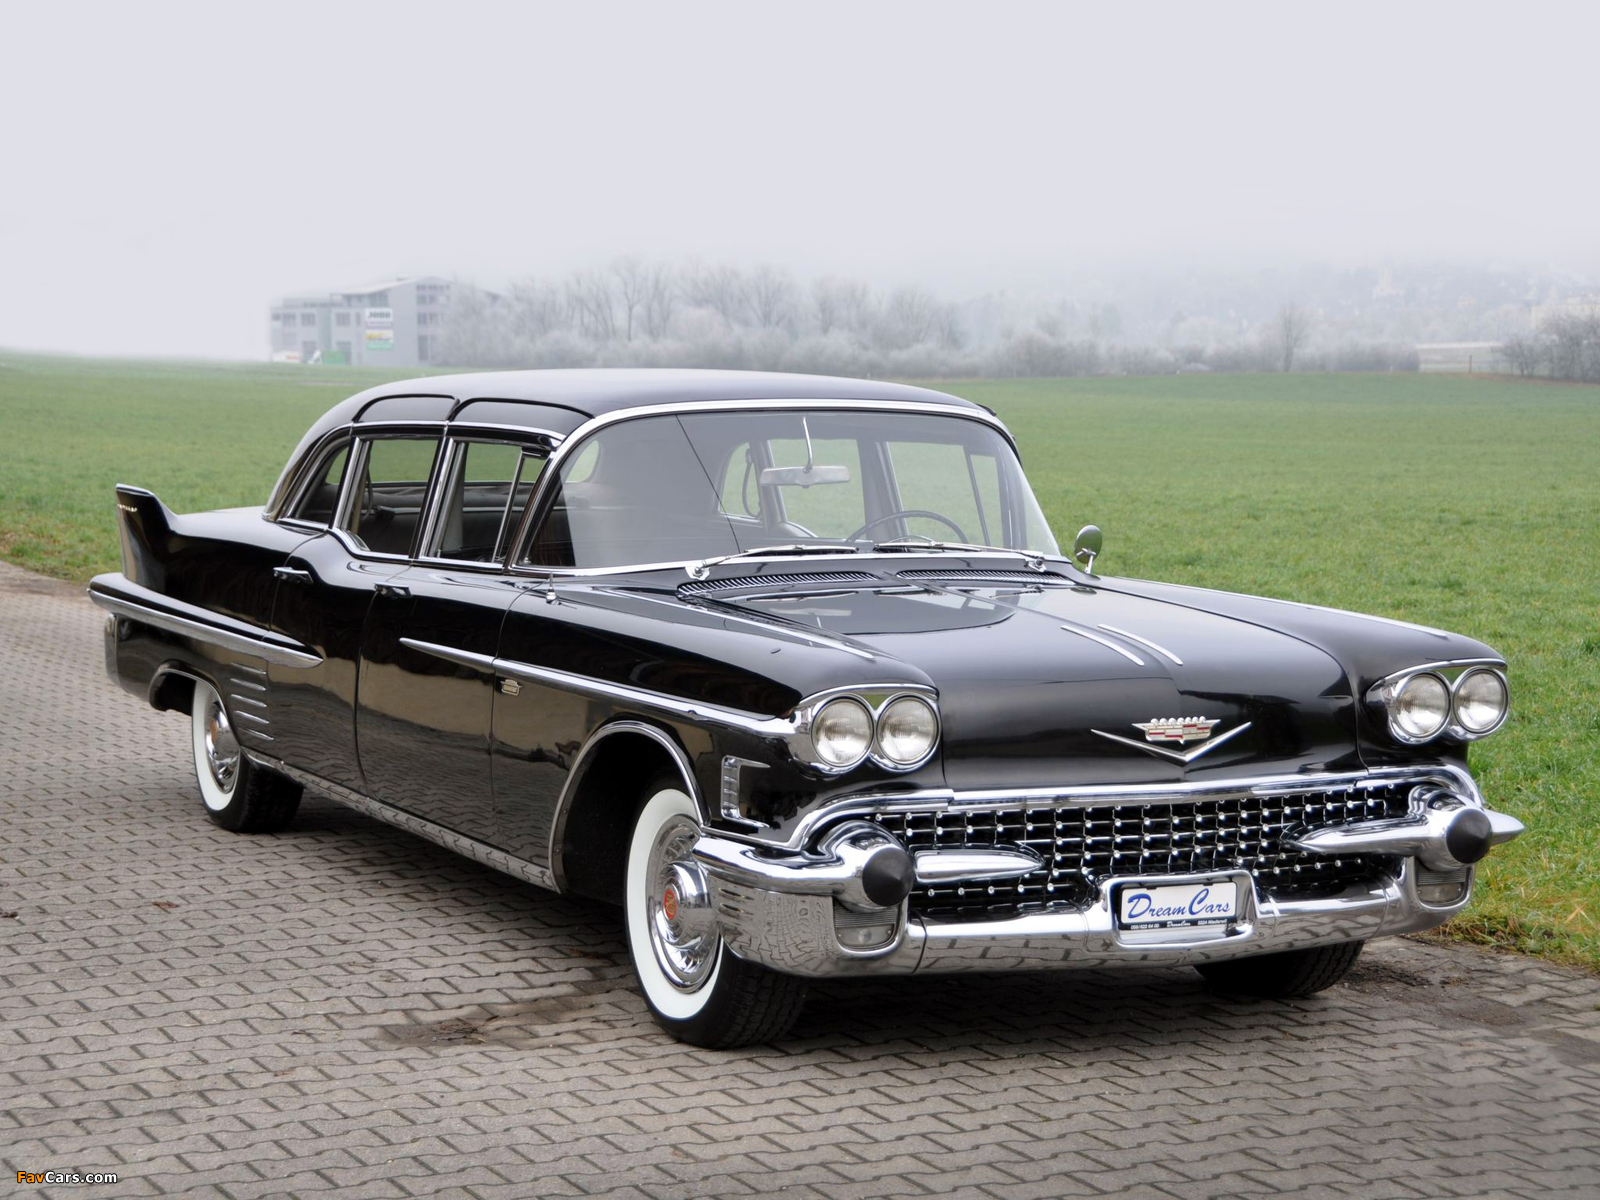 Pictures of Cadillac Fleetwood Seventy-Five Limousine 1958 (1600 x 1200)